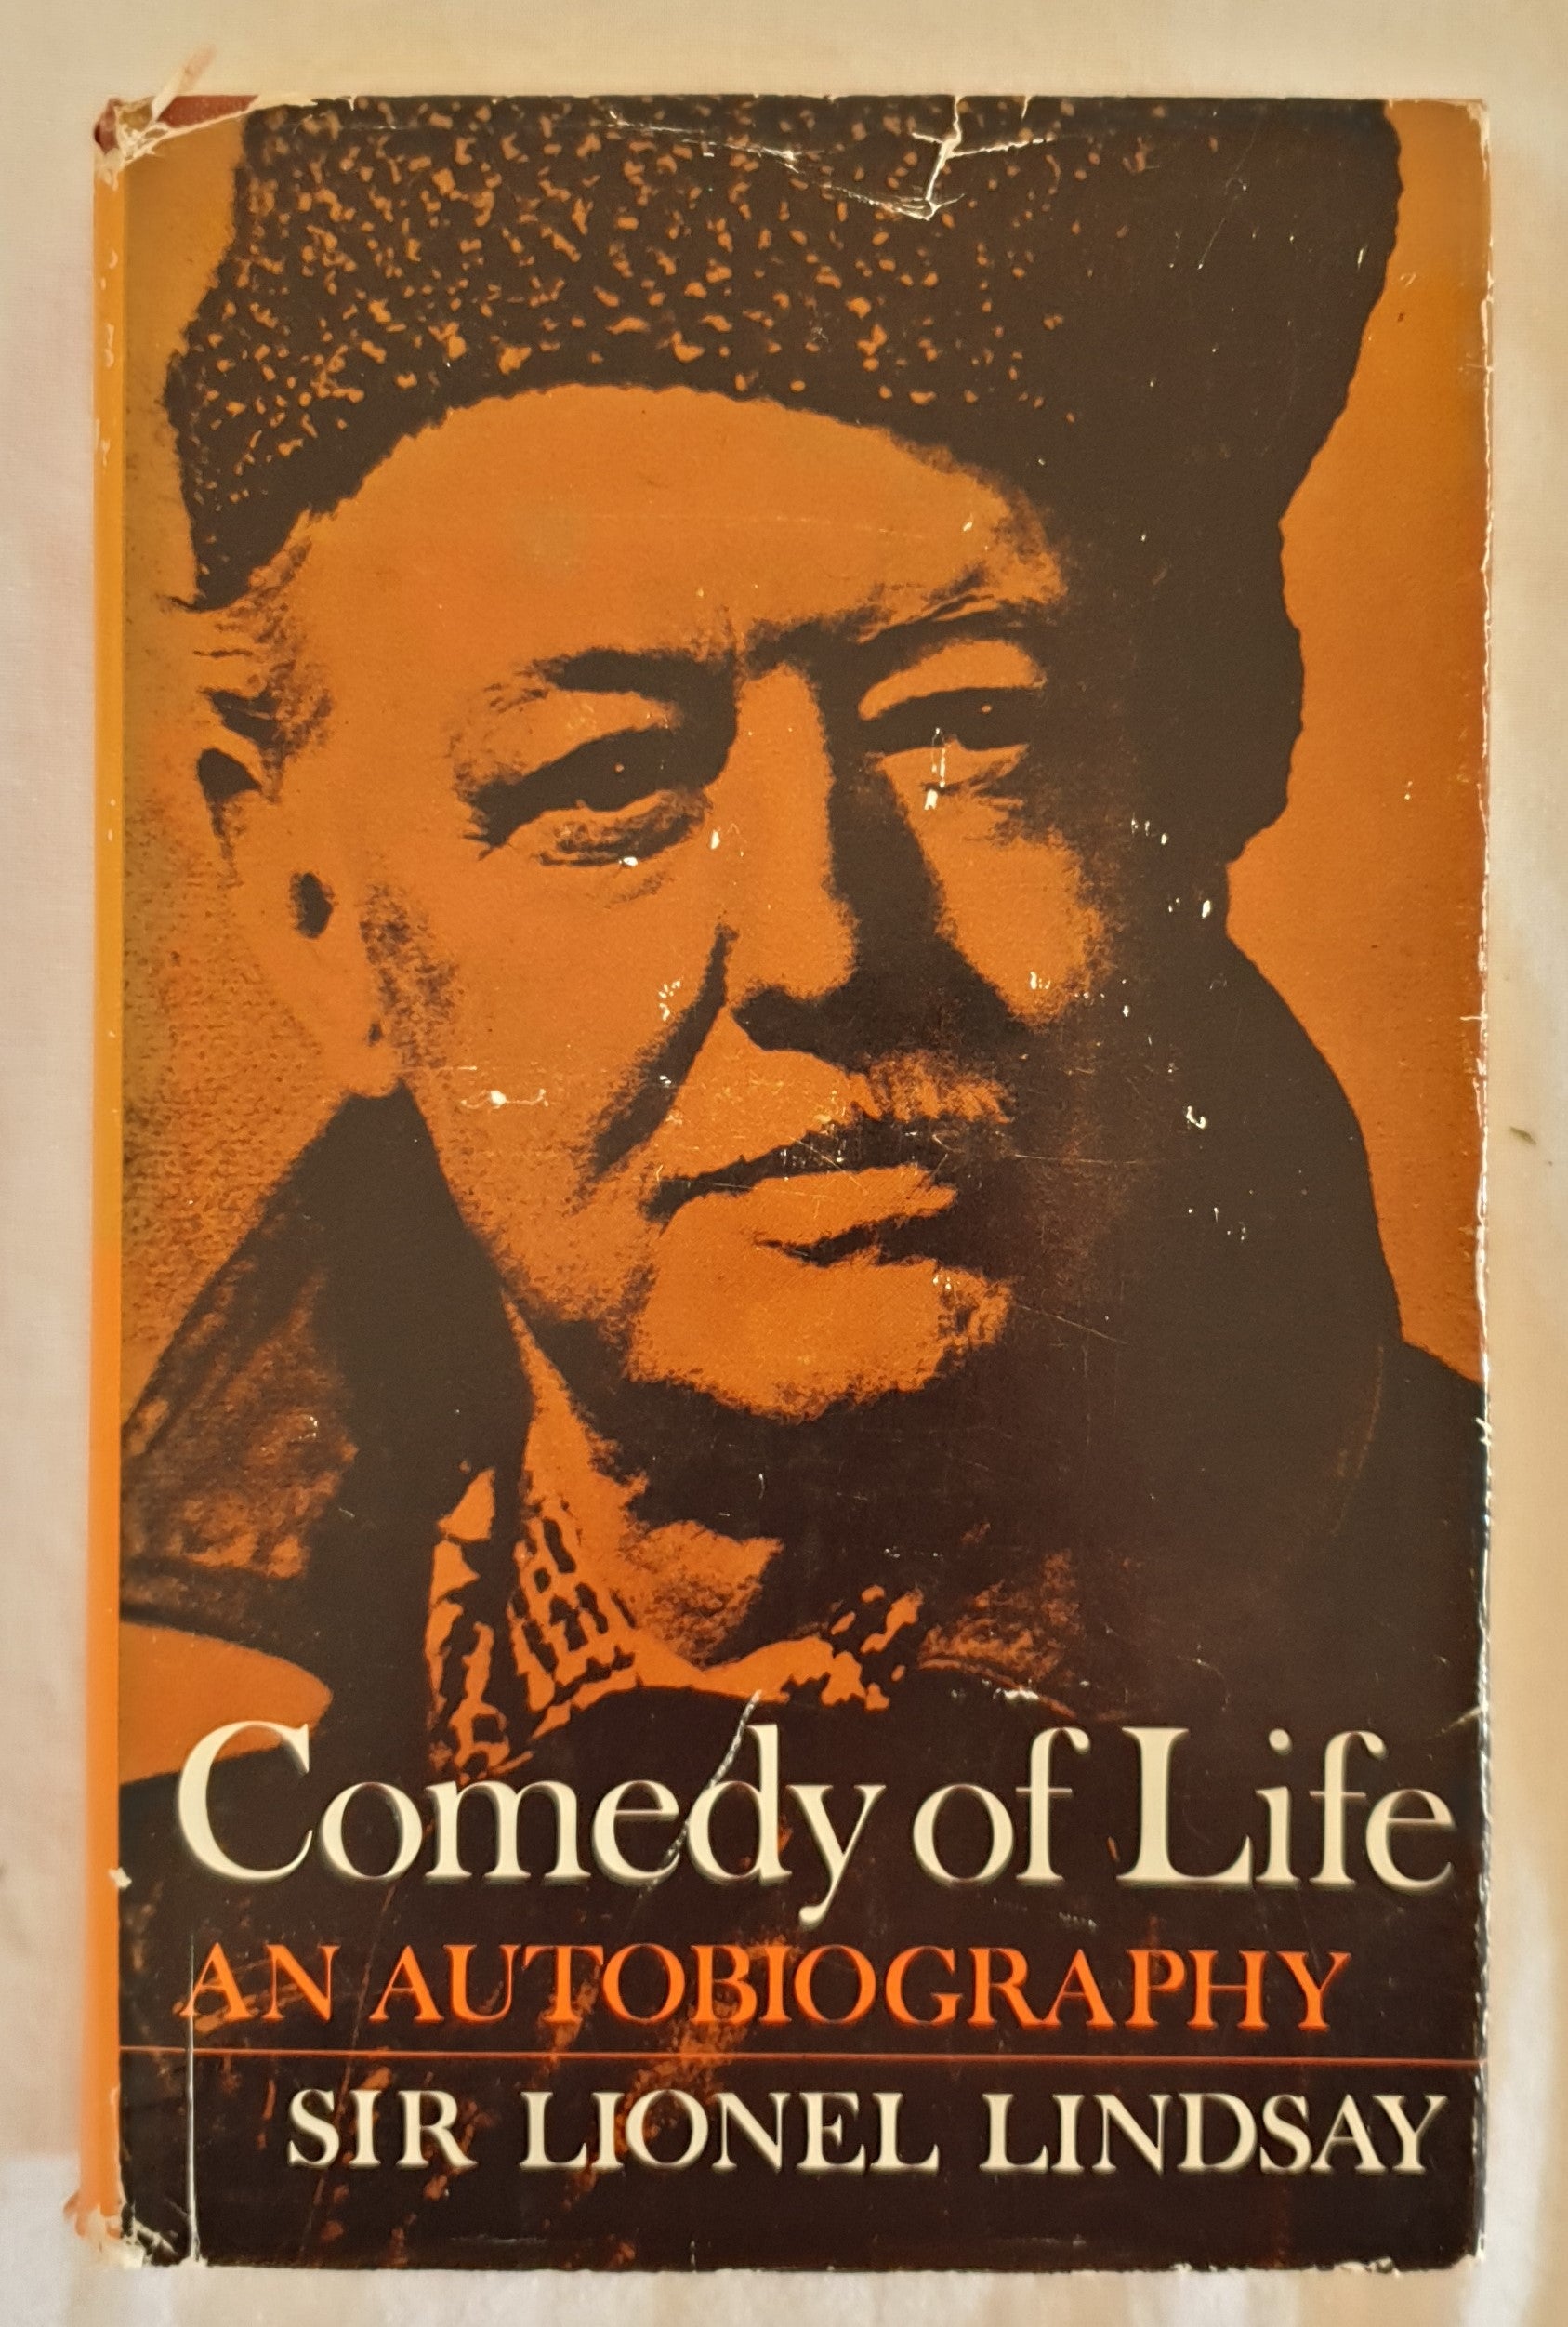 Comedy of Life by Sir Lionel Lindsay